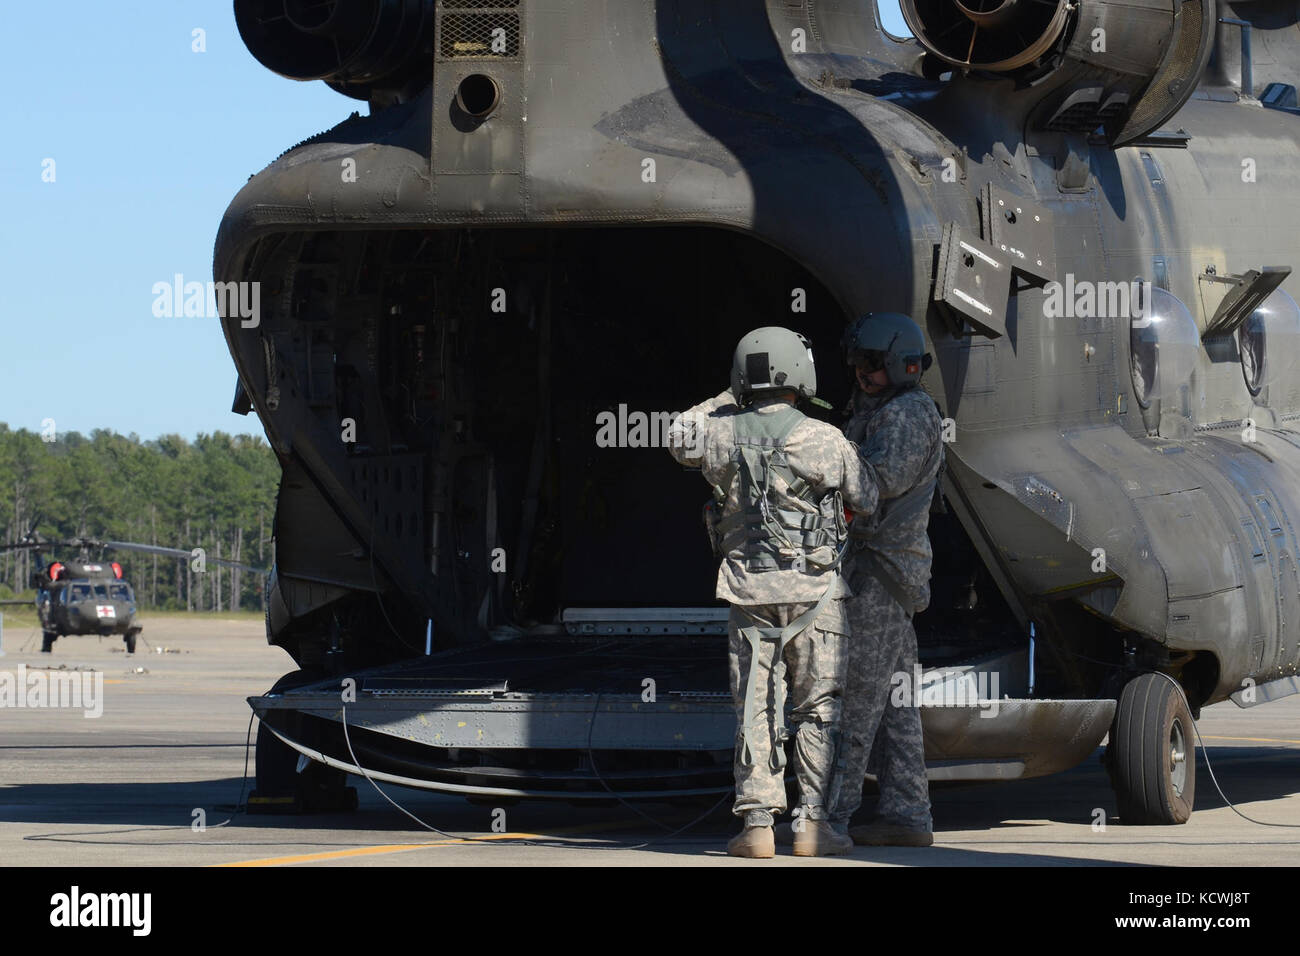 A South Carolina National Guardâs CH-47F Chinook, a heavy-lift helicopter configured with an Extended Range Fueling System (ERFS), also referred to as the &quot;Fat Cow,&quot; and its aircrew assigned to Detachment 1, Company B, 2-238th General Support Aviation Battalion, 59th Aviation Troop Command from Greenville S.C., stages its base of operations in support of Hurricane Matthew recovery efforts at McEntire Joint National Guard Base, Eastover, S.C., Oct. 10, 2016. Approximately 2,000 South Carolina National Guard Soldiers and Airmen were activated in direct support to Hurricane Matthew resp Stock Photo